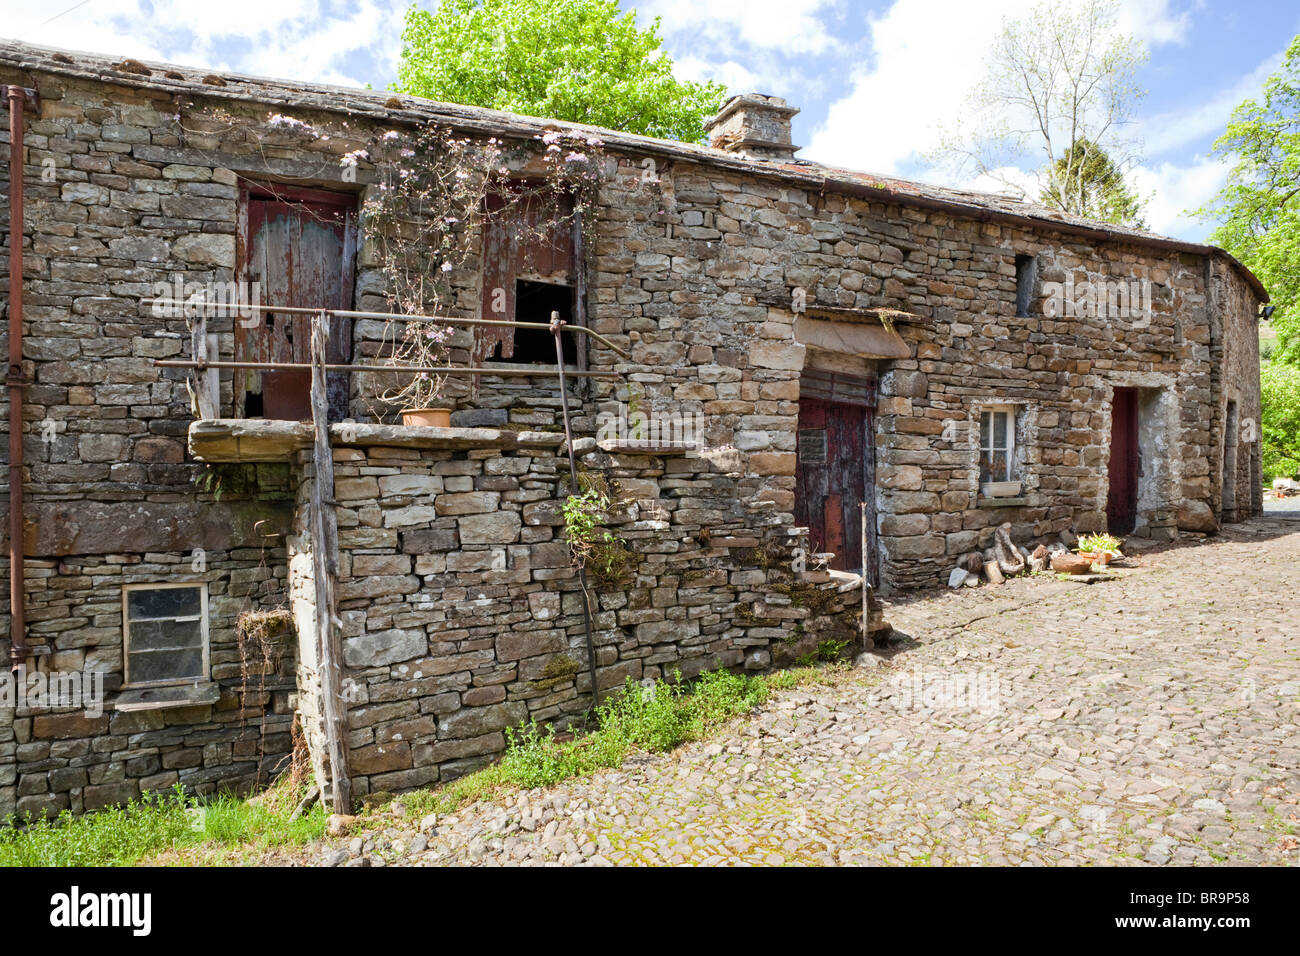 An Old Stone Longhouse In The Yorkshire Dales National Park At